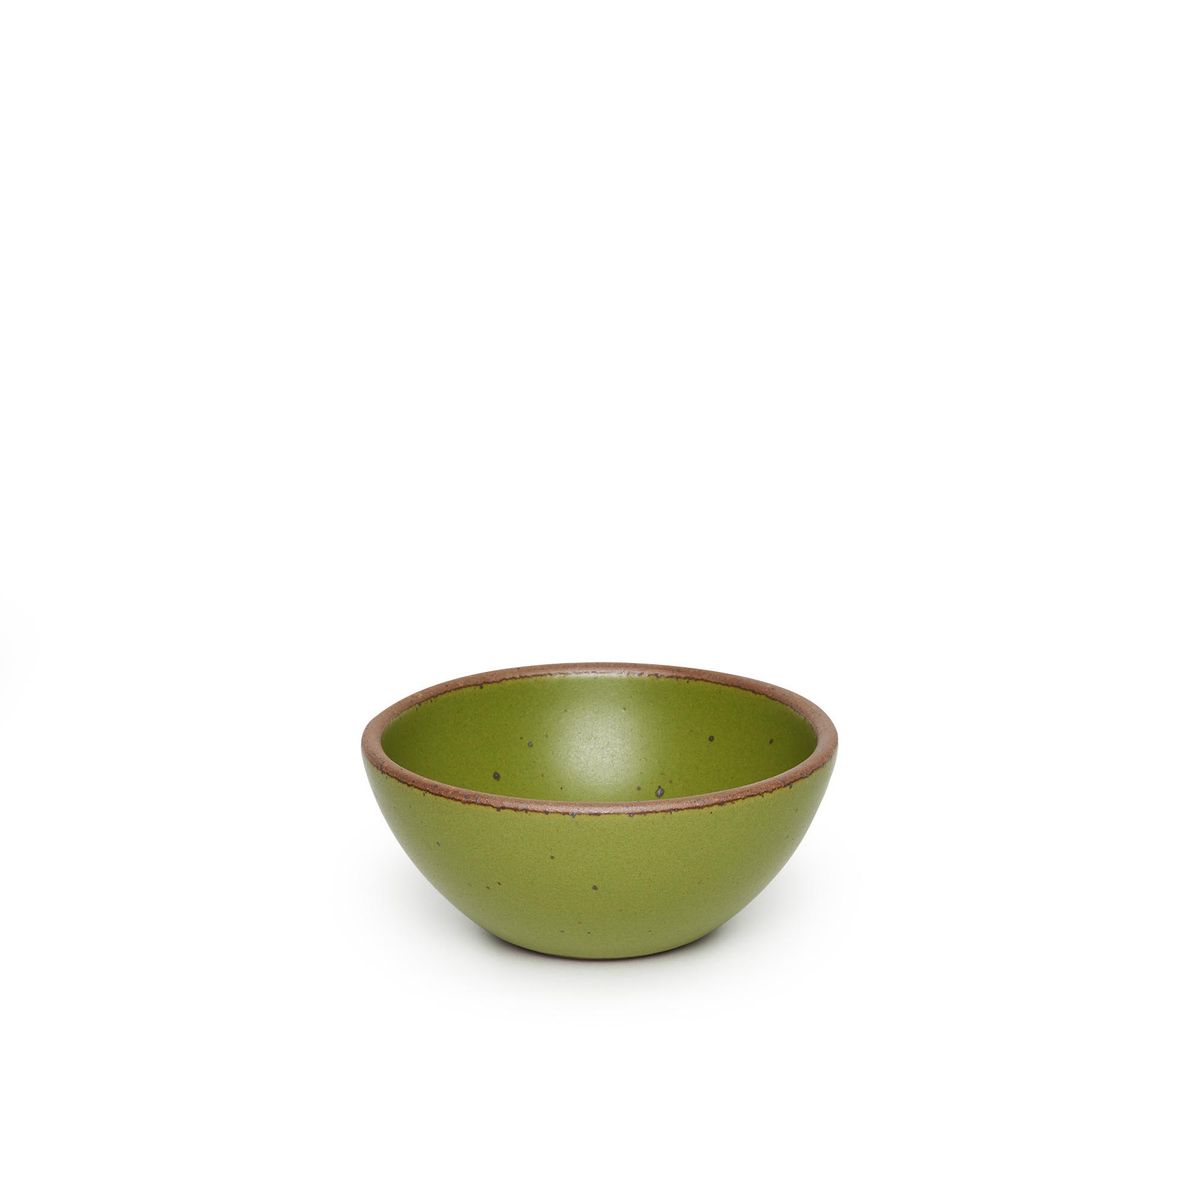 Icre Cream Bowl in Fiddlehead, a mossy, olive green.